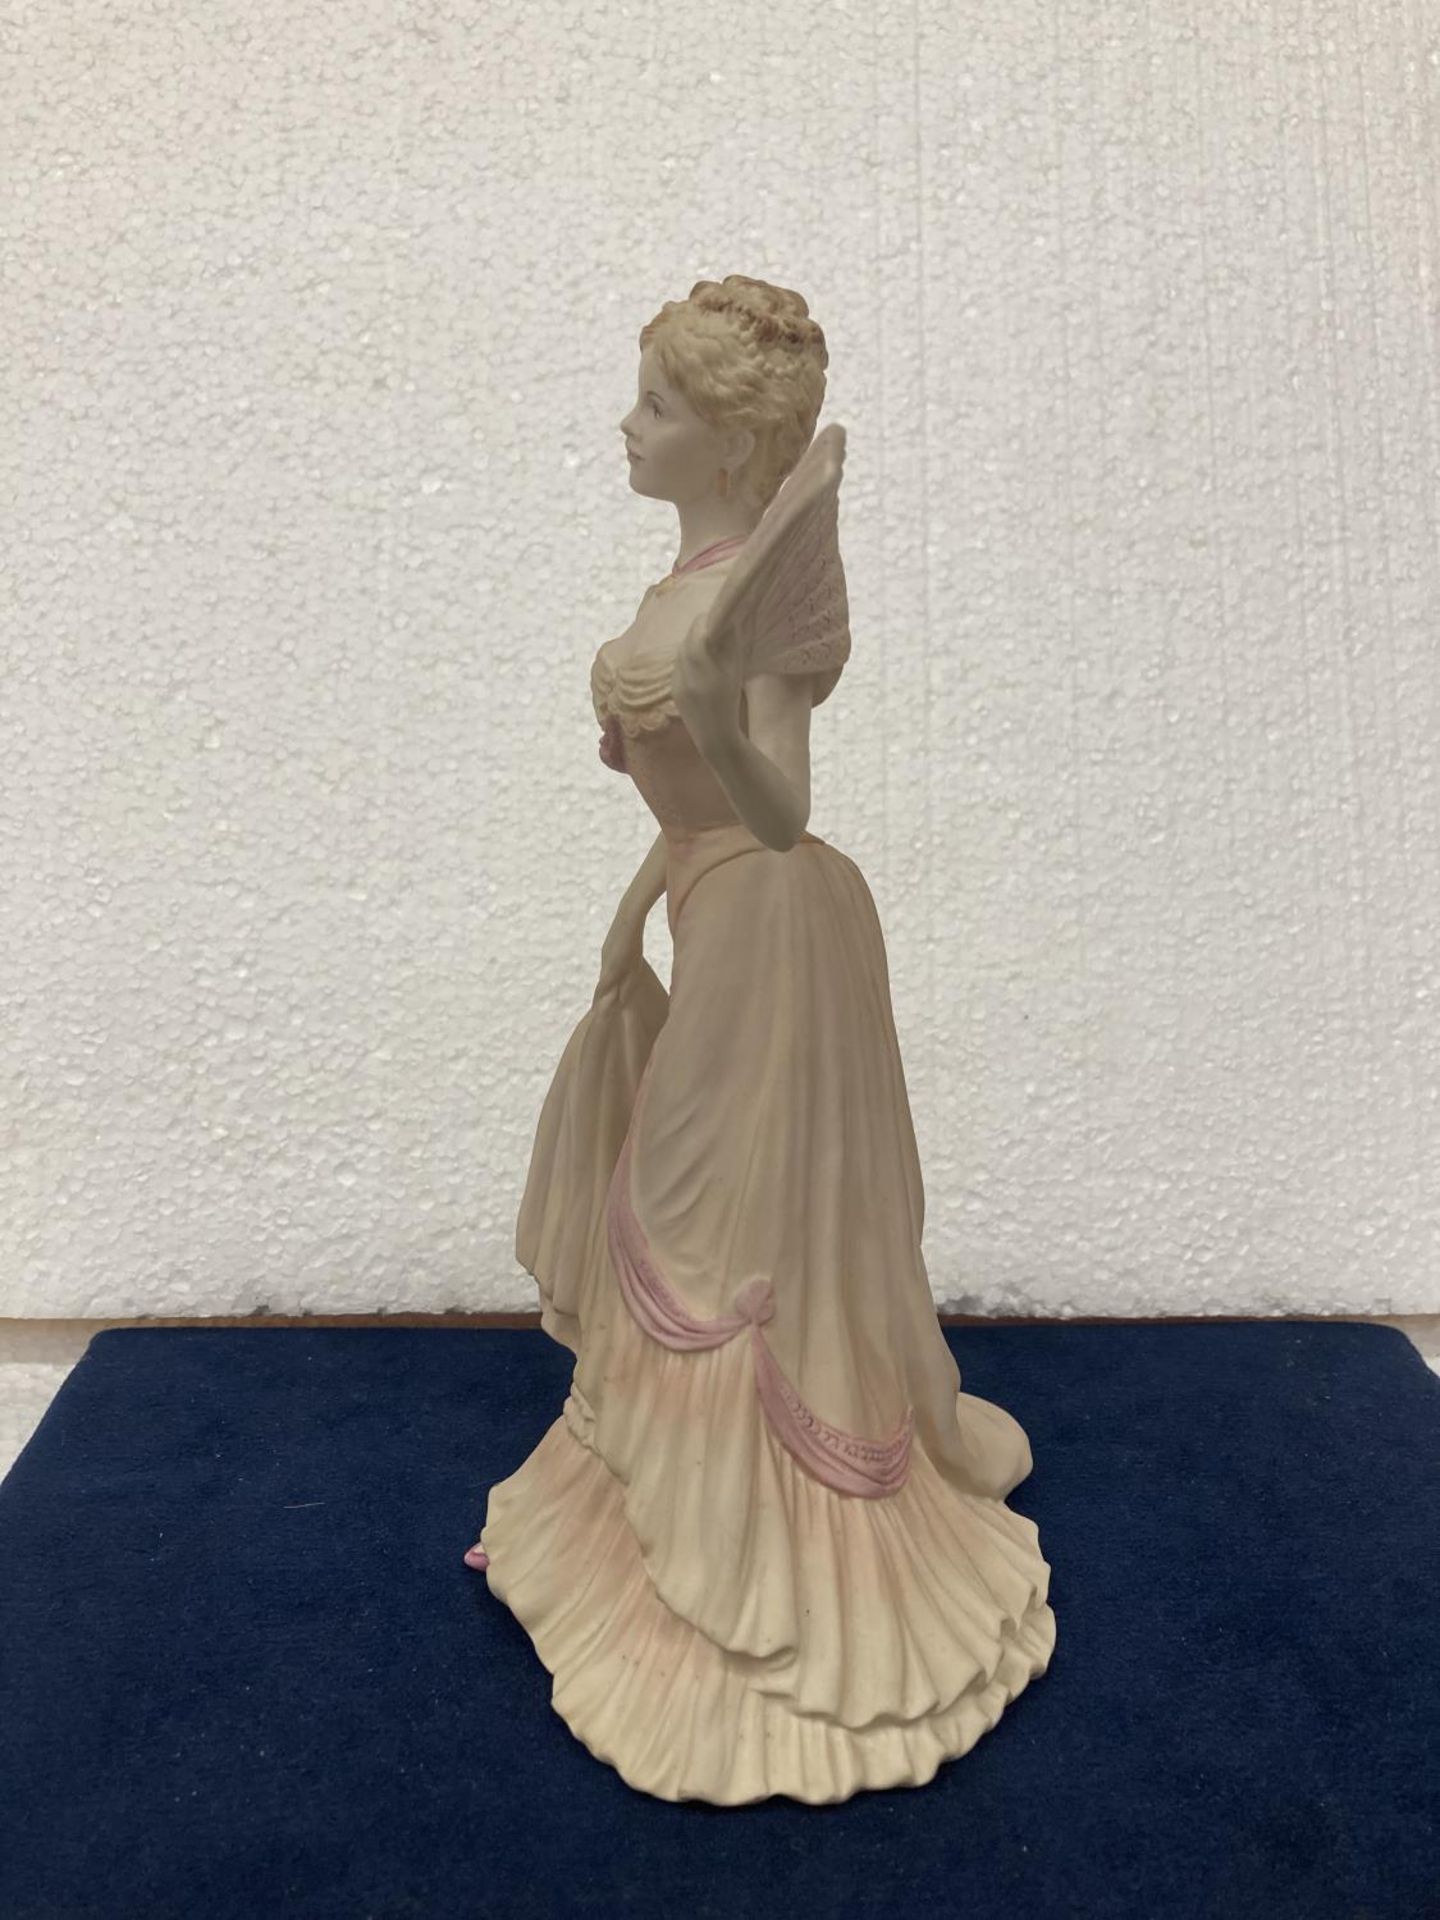 A COALPORT PORCELAIN FIGURINE FROM THE AGE OF ELEGANCE COLLECTION "EVENING AT THE OPERA" HAND - Image 7 of 8